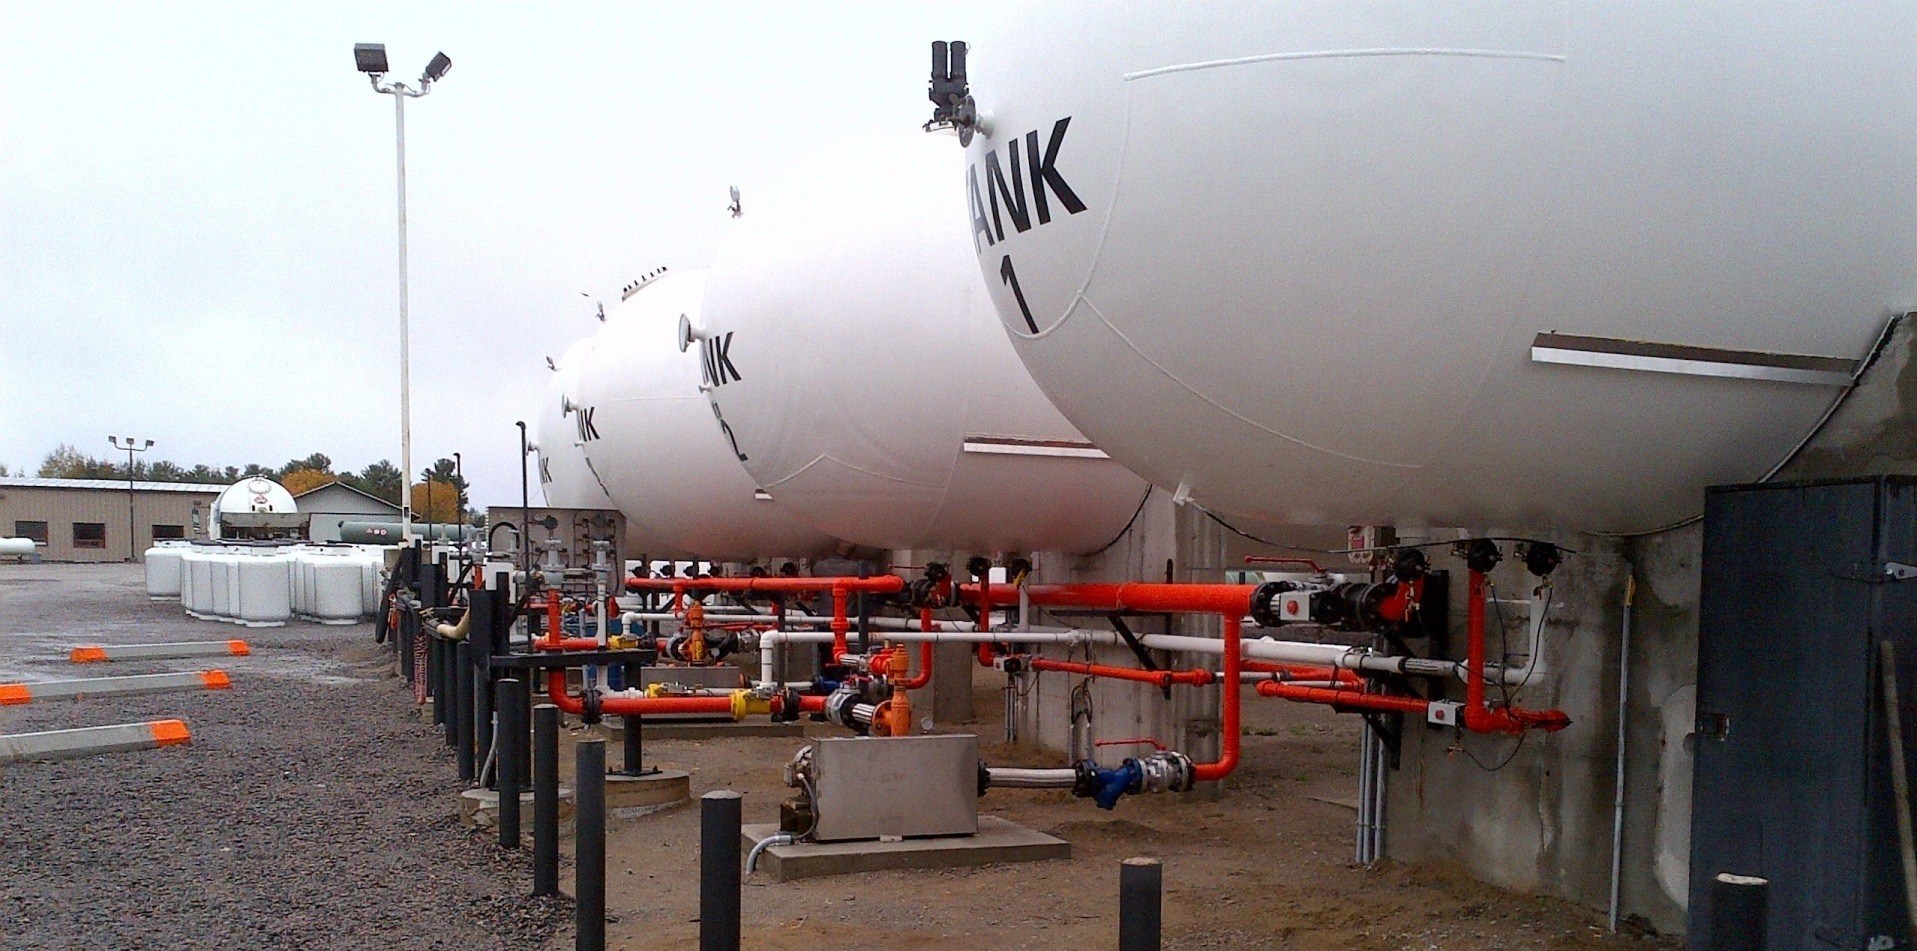 Keep an Eye on It: Security for Propane Terminals